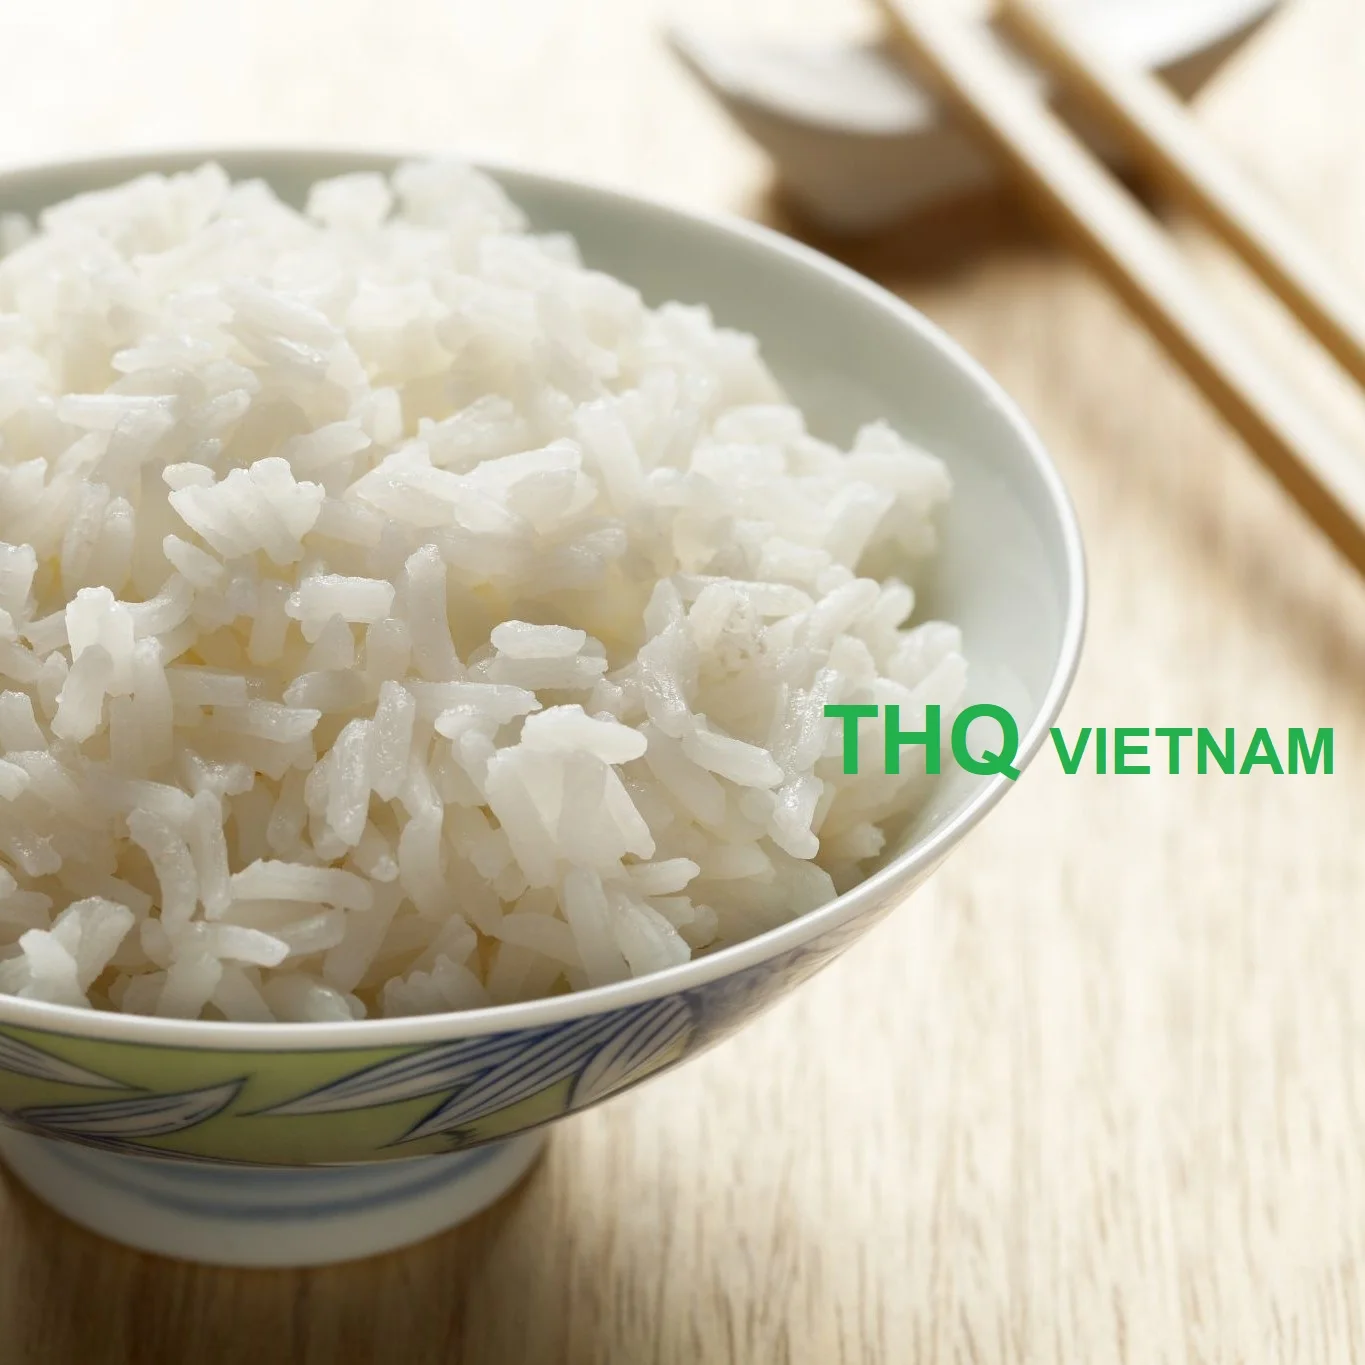 
FACTORY PRICE JASMINE RICE/ FRAGRANT RICE - LONG GRAIN WHITE RICE - GREAT QUALITY (Ms. Rose: +84 977 610 525) 